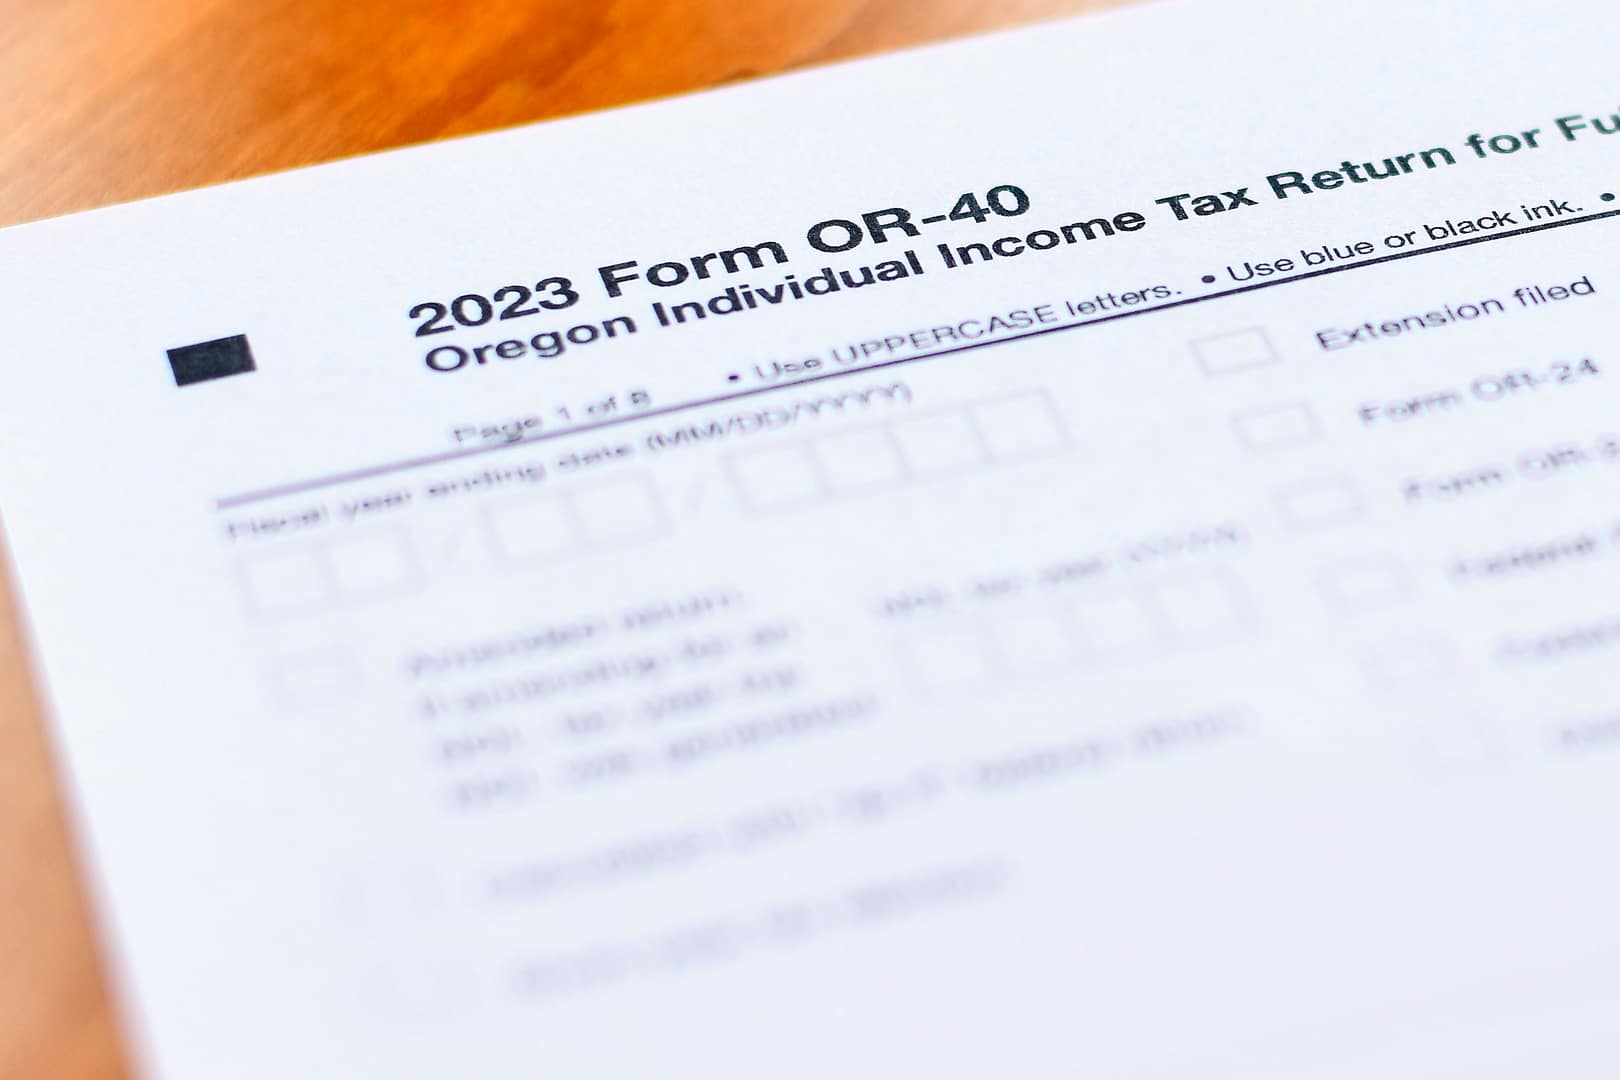 2023 Form OR-40, the Oregon individual income tax return form for full-year residents, sits on a table.